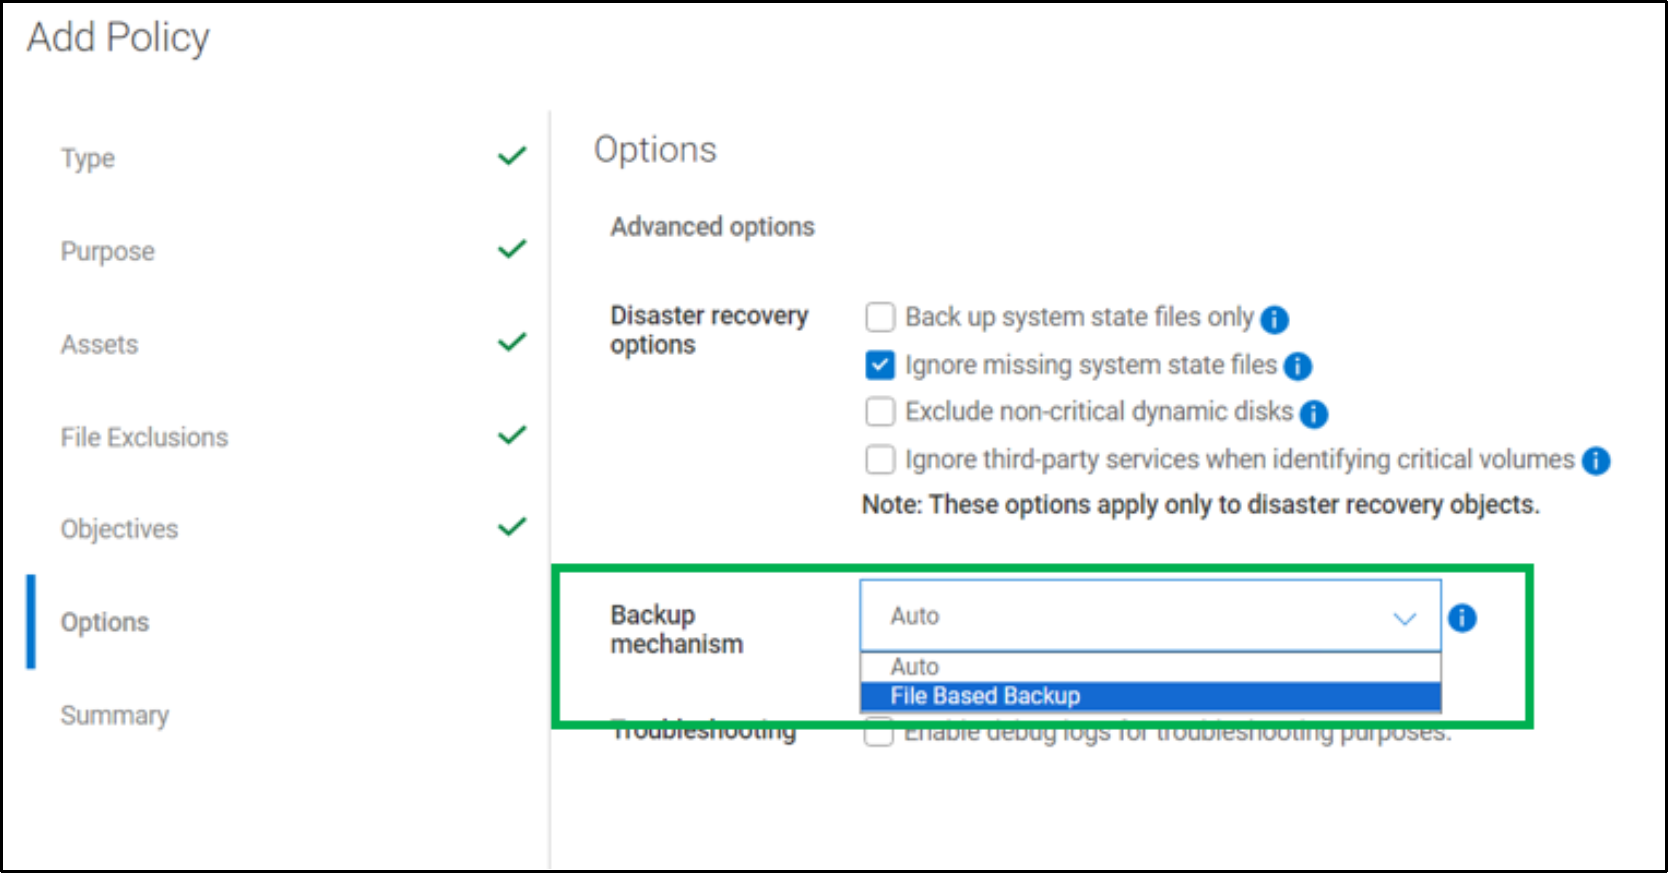 This image shows the option to select the preferred backup mechanism option 